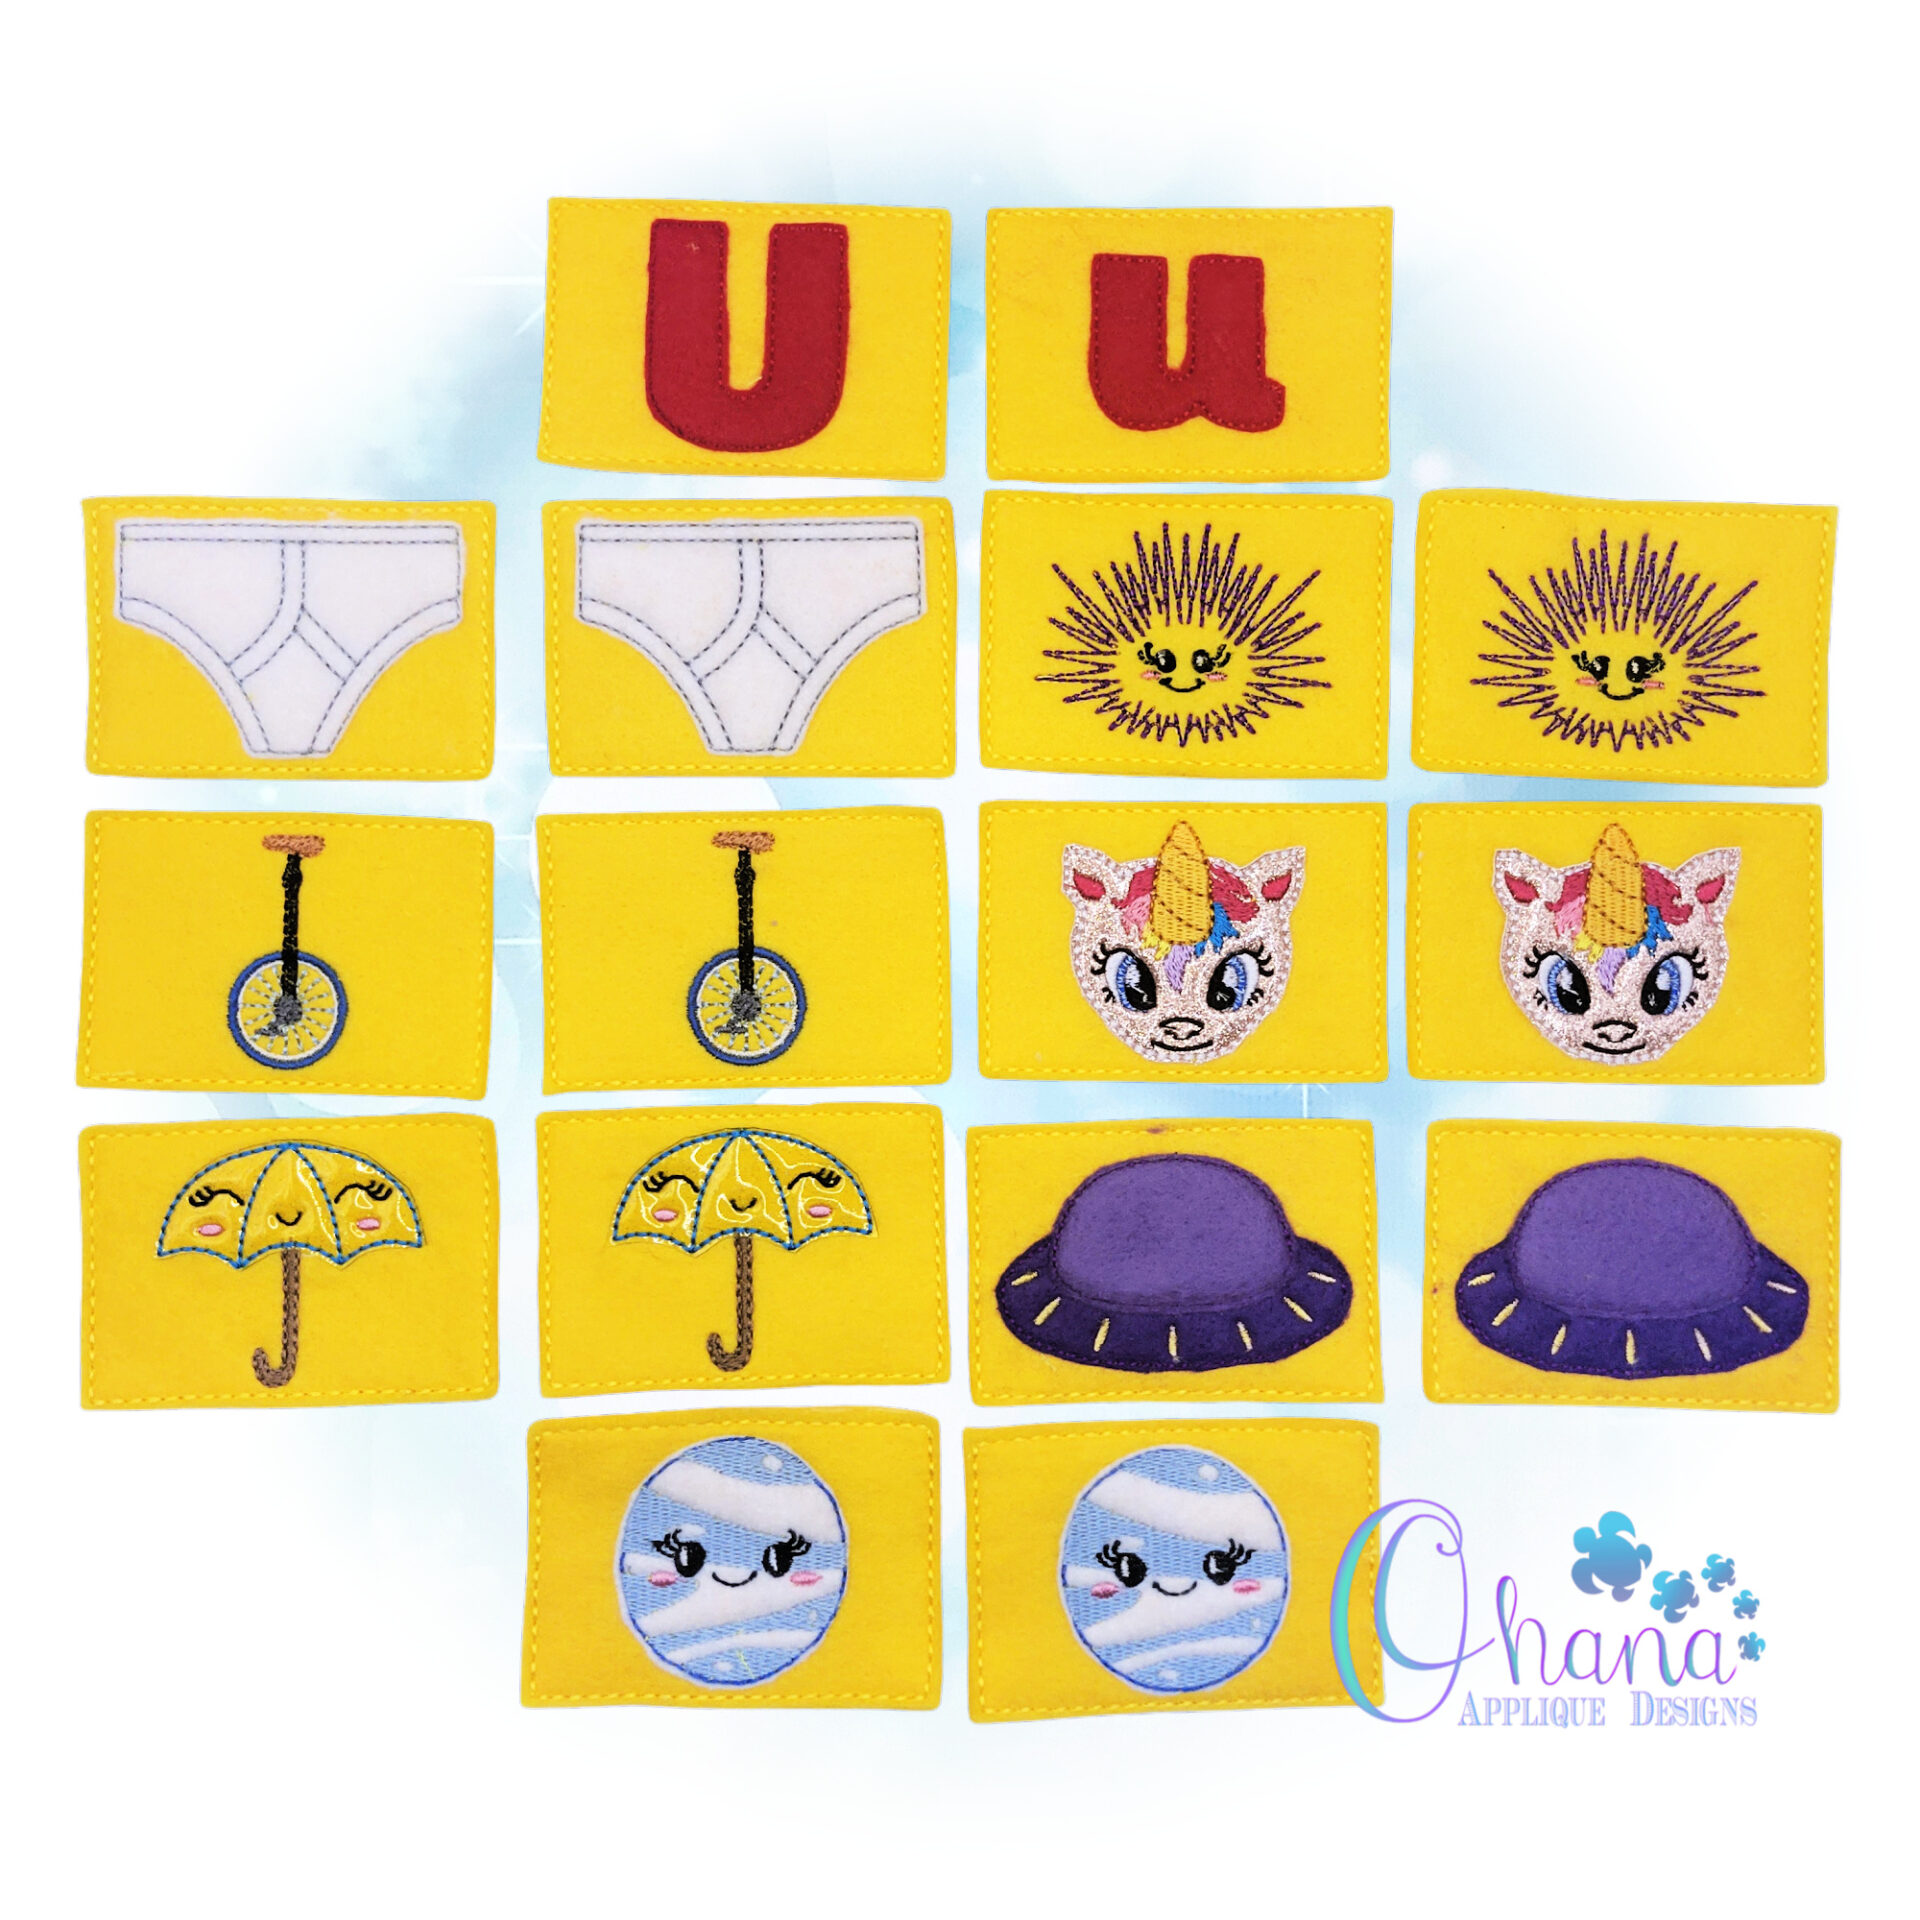 Letter U Matching Card Game